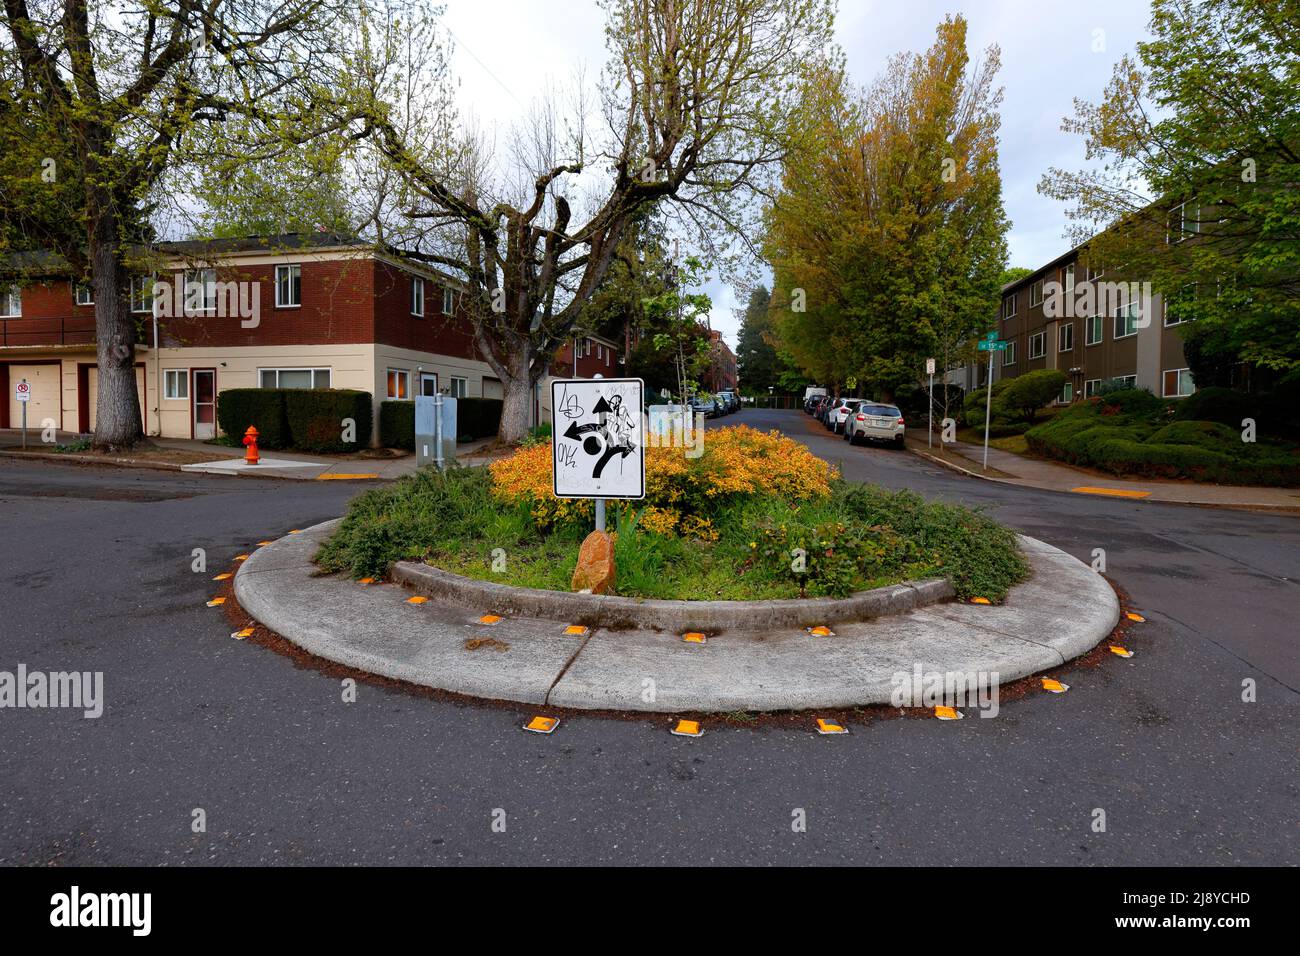 A traffic circle at the intersection of SE Oak St and SE 15th Ave, Portland, Oregon. Traffic circles are used to calm traffic and to reduce conflict .. Stock Photo